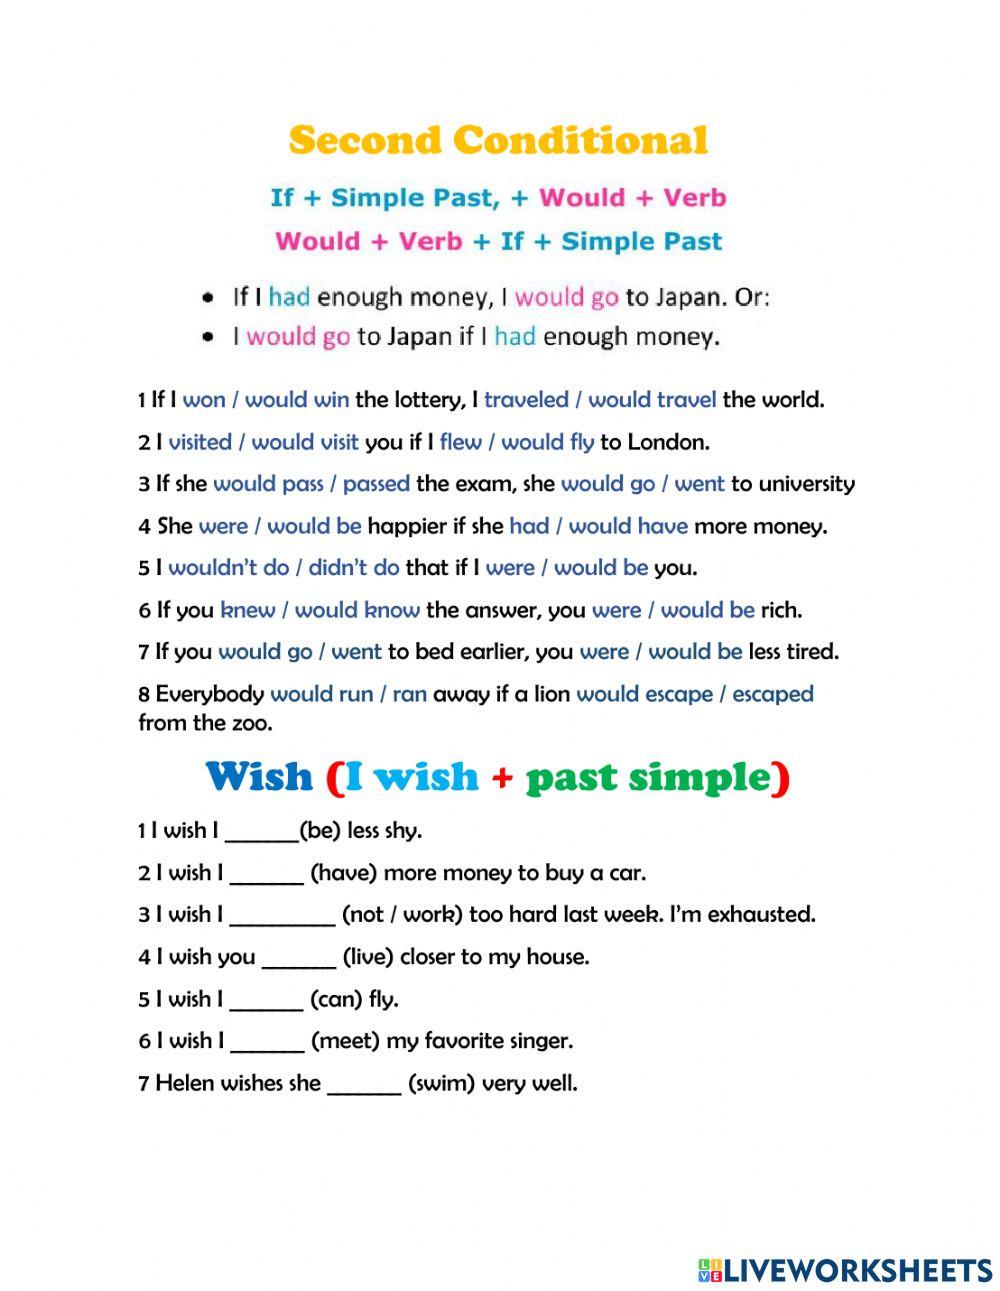 Second Conditional and Wish Quiz